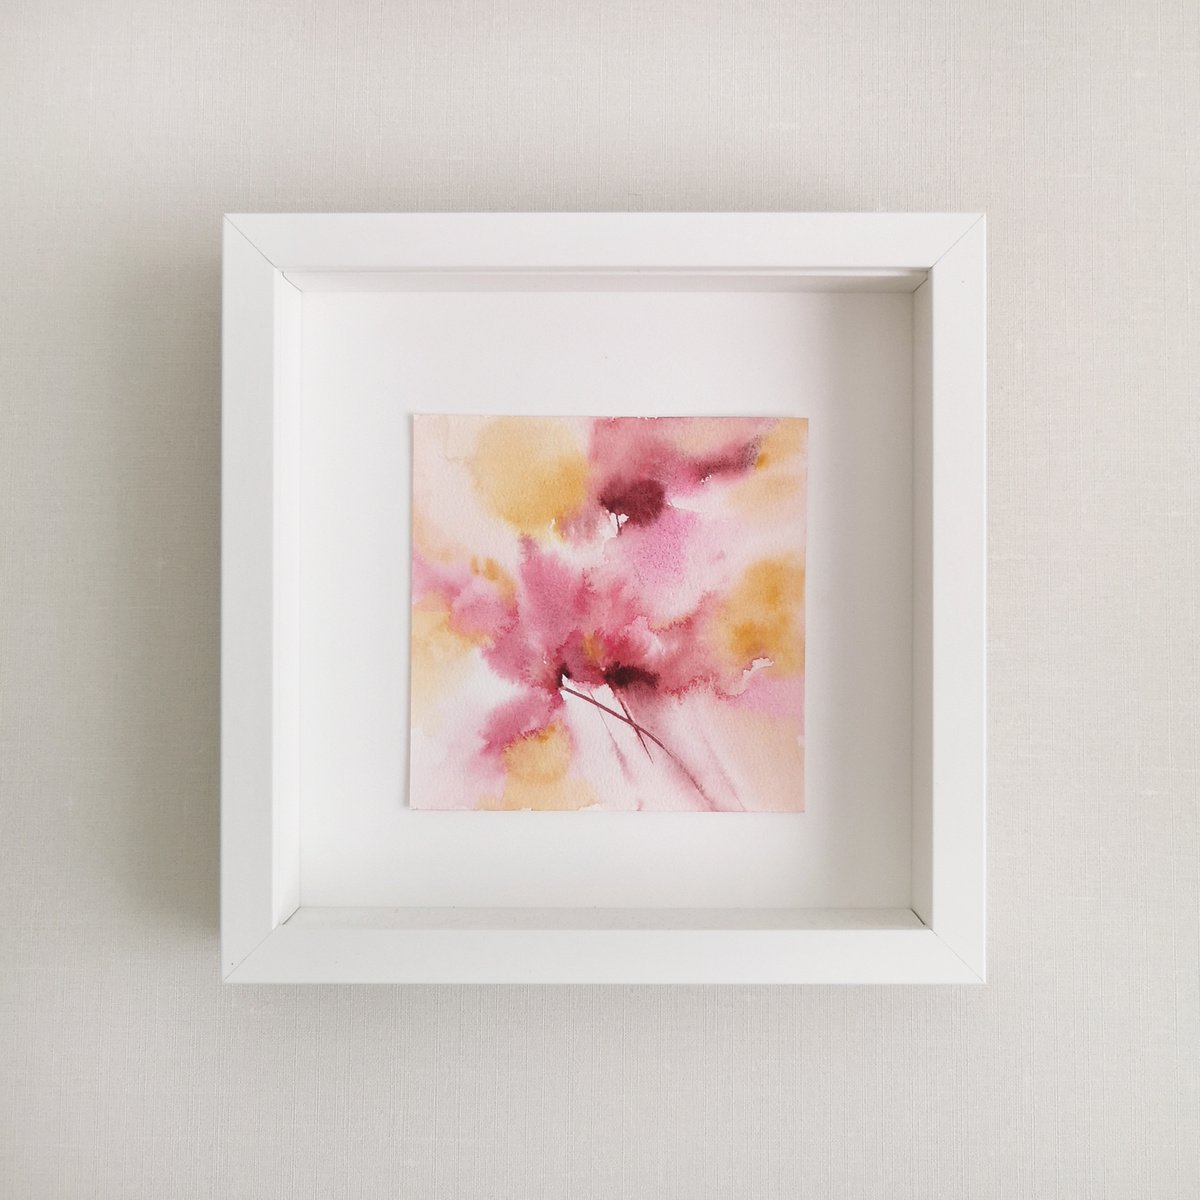 Abstract flowers. Small watercolor floral artwork by Olya Grigo